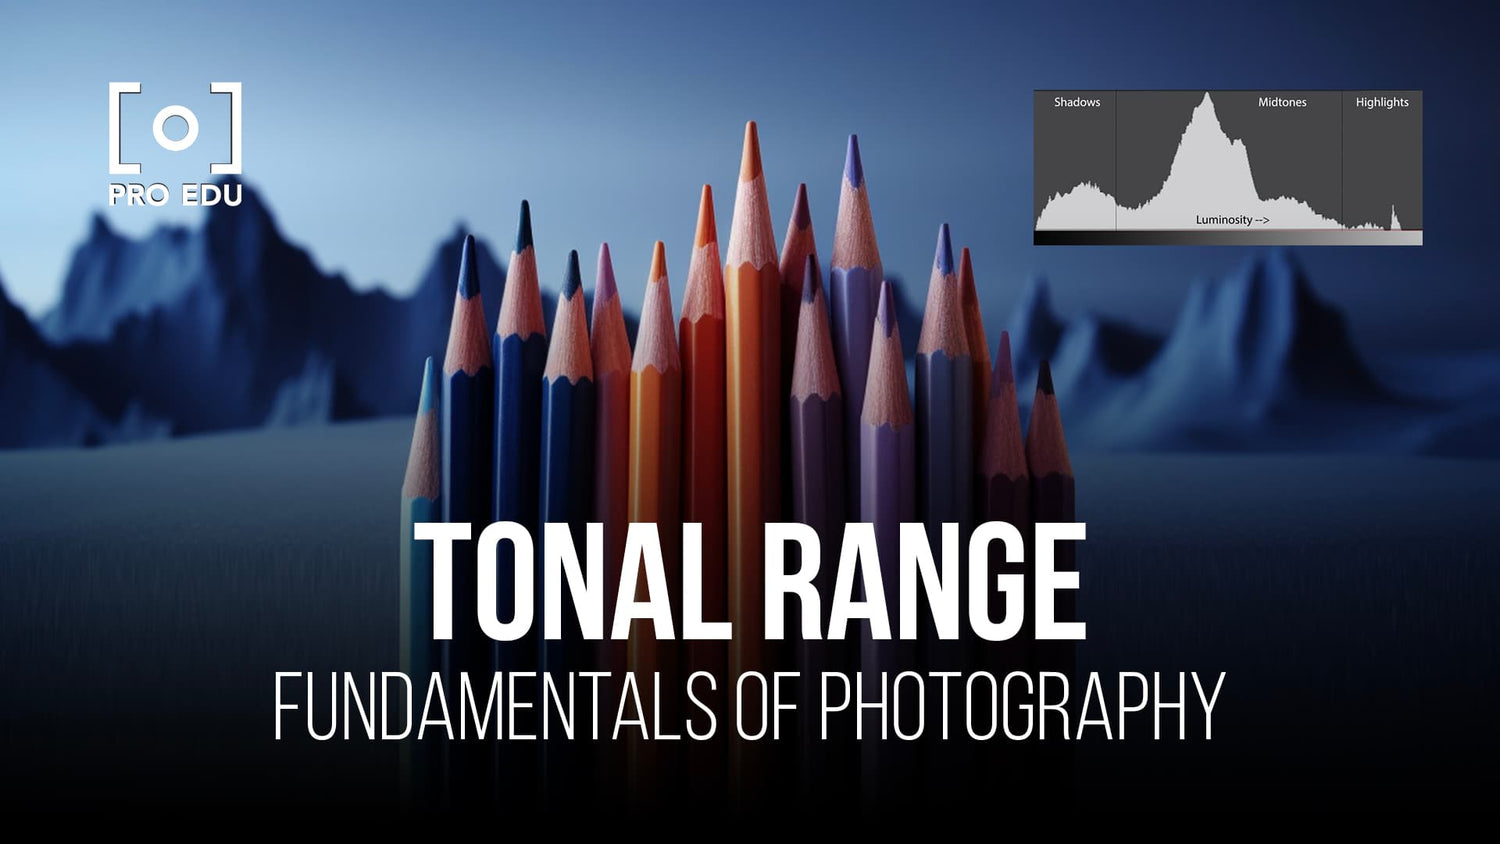 Exploring tonal range in photography for balanced and dynamic images